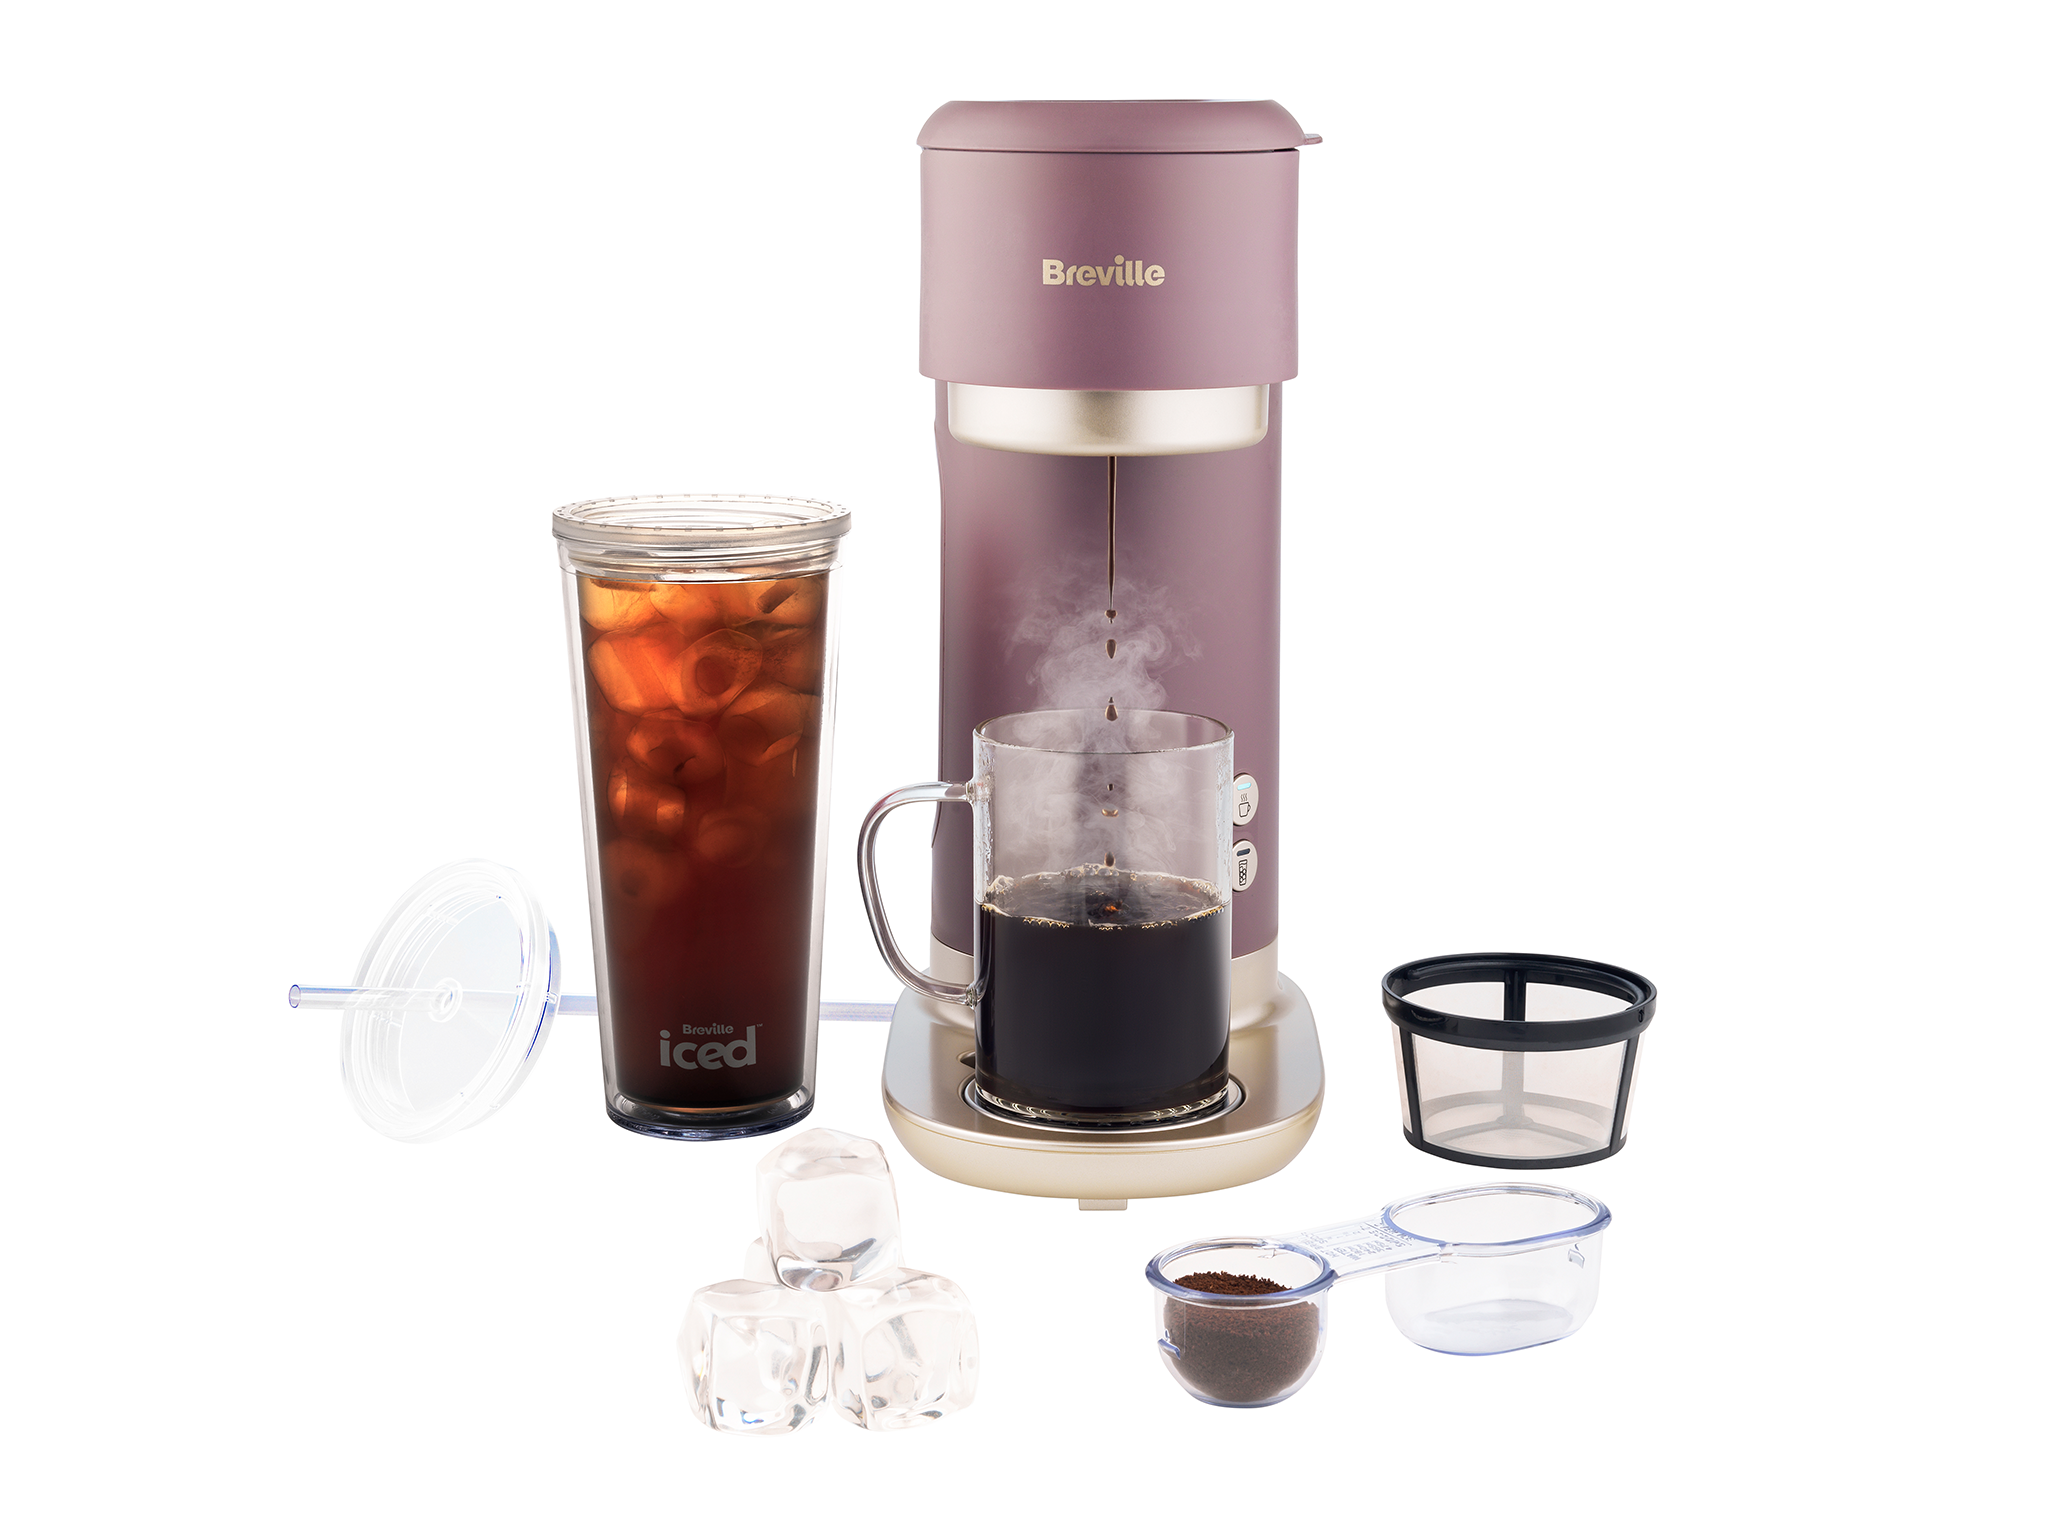 Breville iced+hot coffee machine